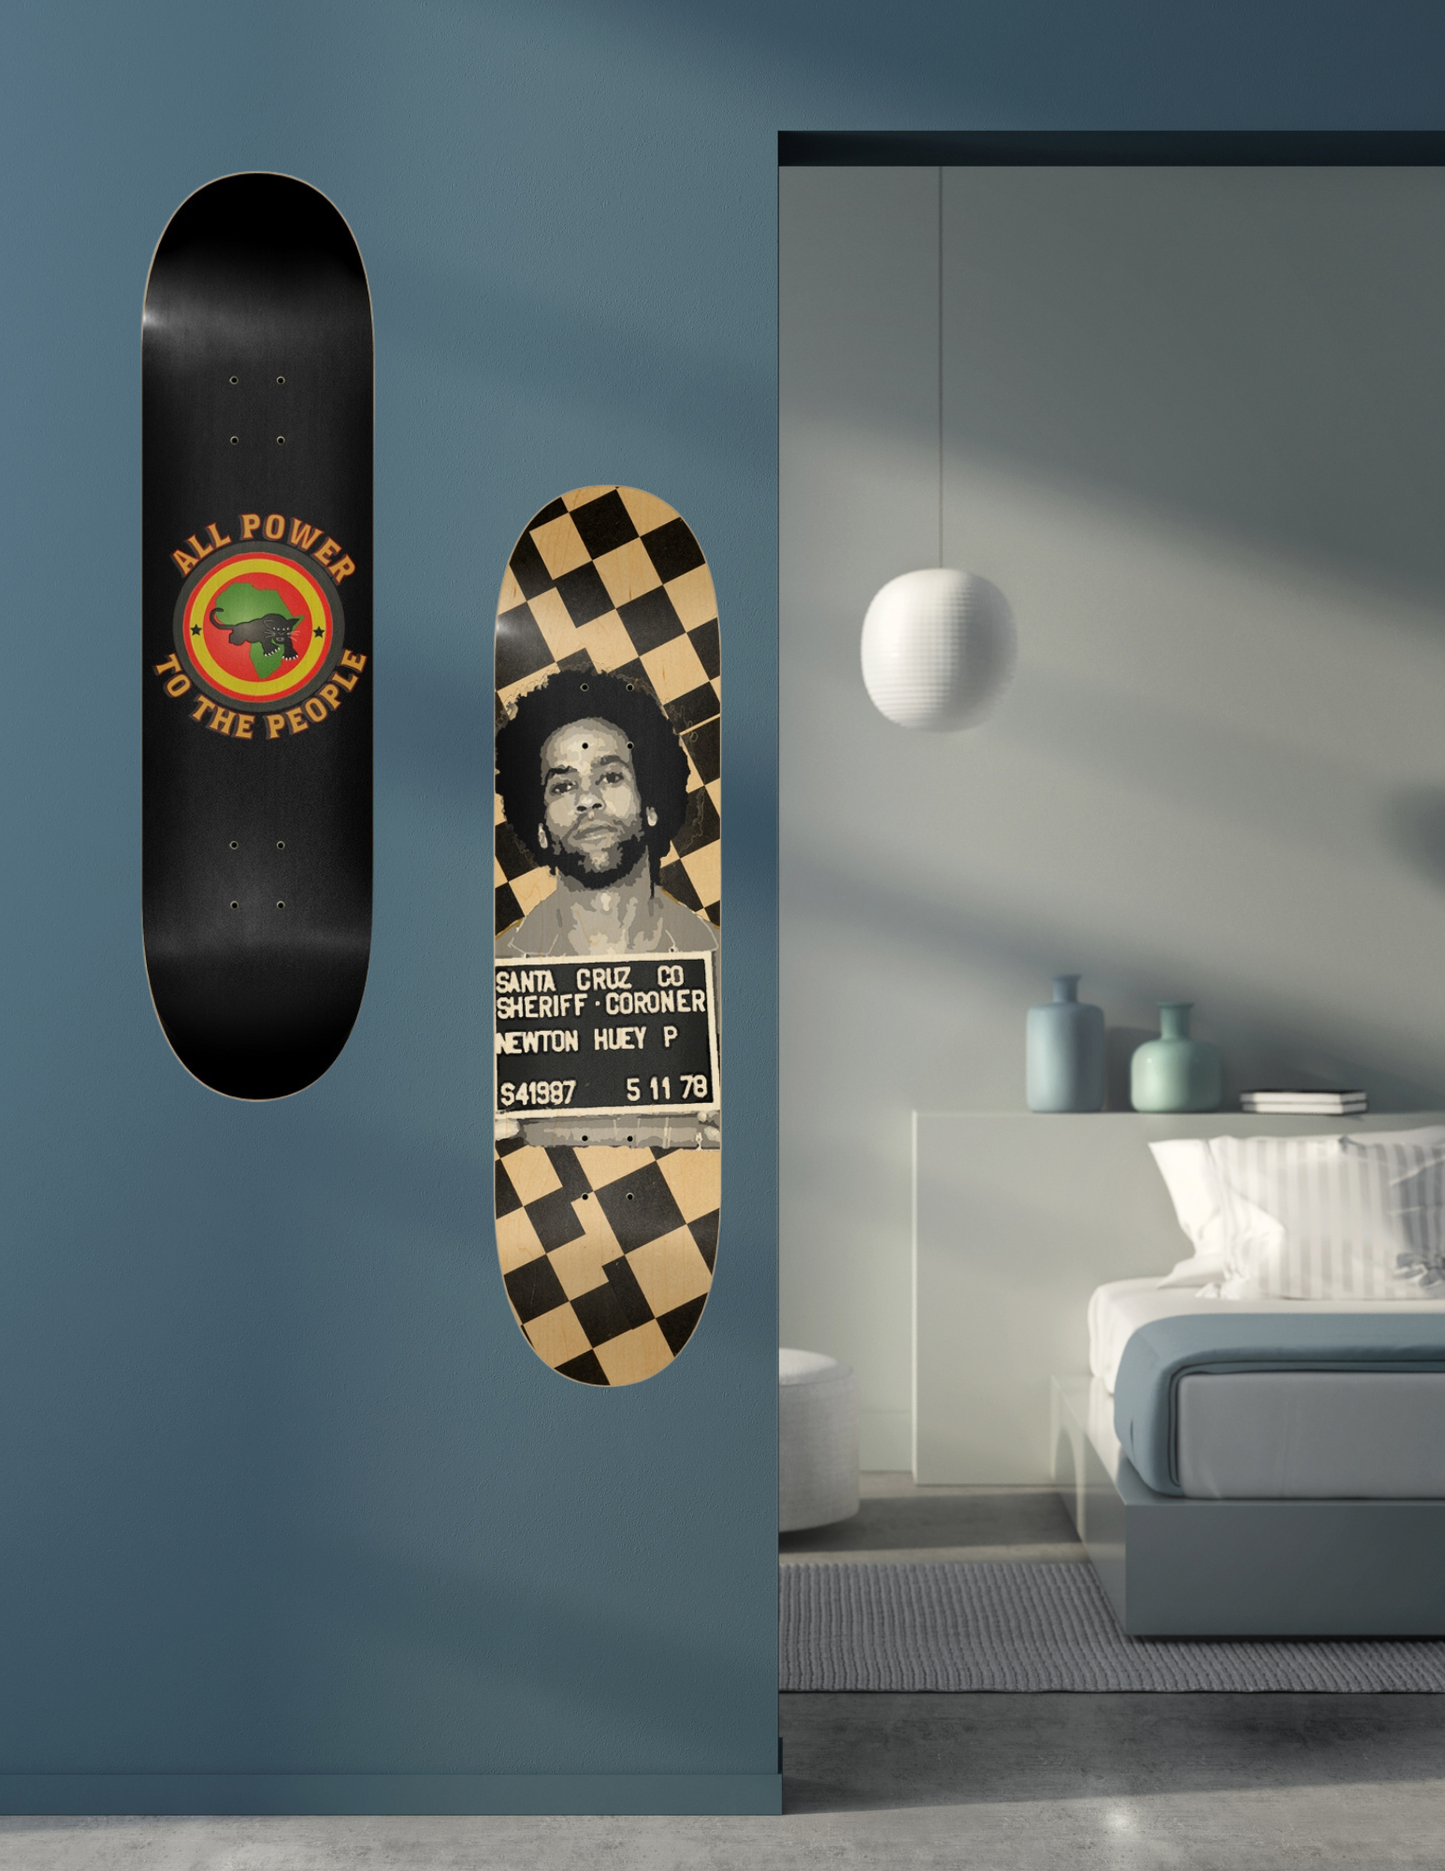 Black History Power to the People  Skateboard